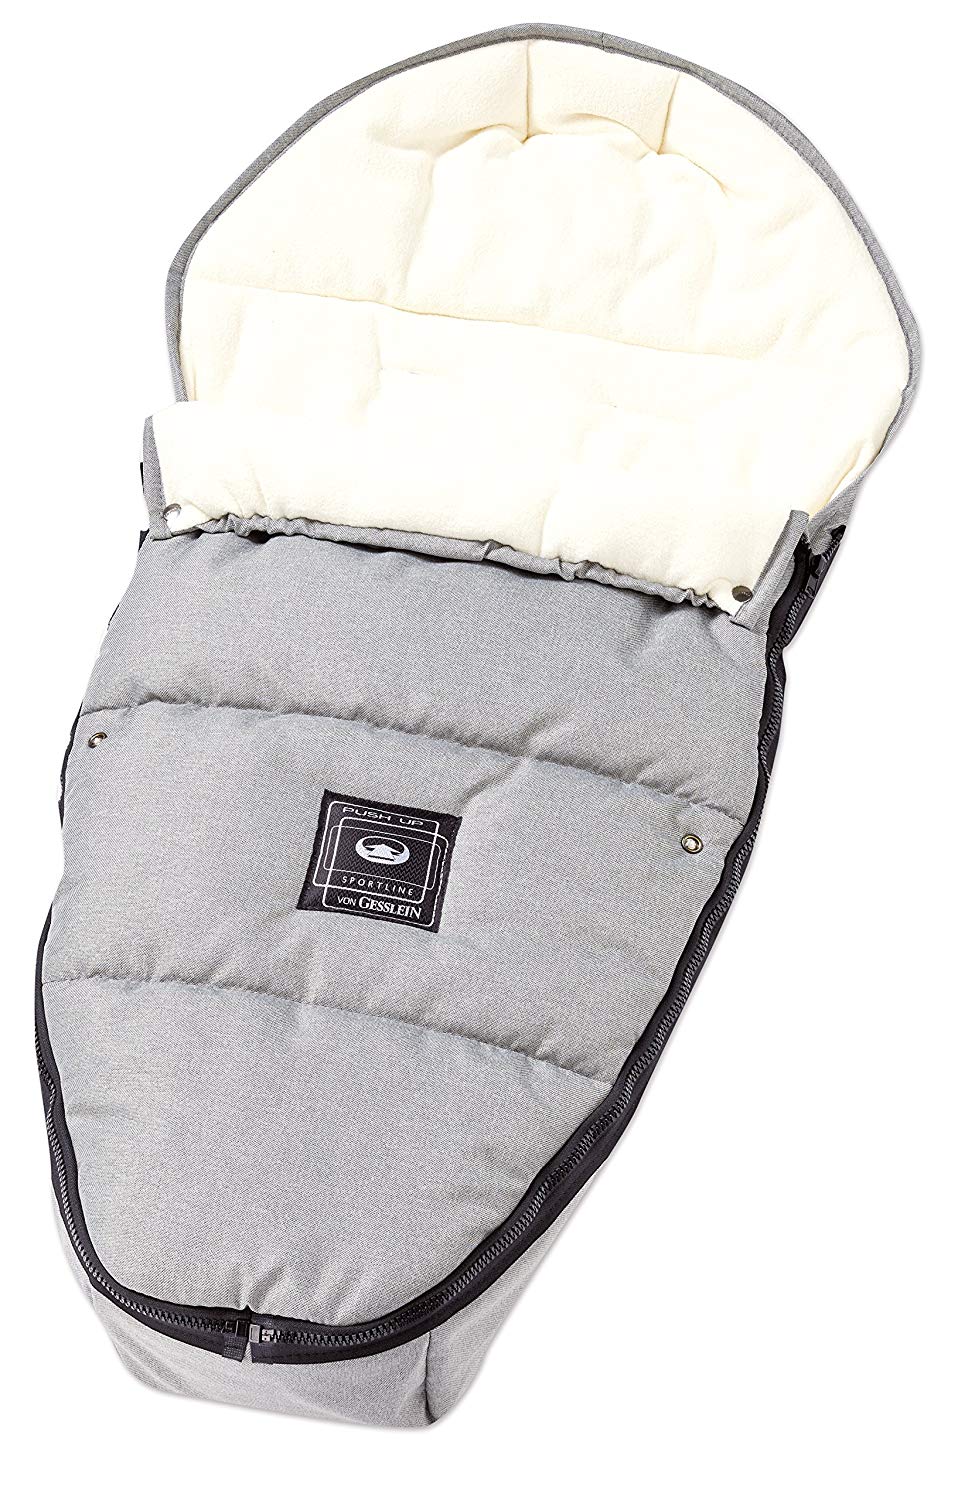 Gesslein Sleepy Winter Footmuff for Pushchairs Design 716431 Pushchair Buggy Baby Bath or Sledge with Thermal Function Cuddly Fleece and Drawstring in Head Area Grey